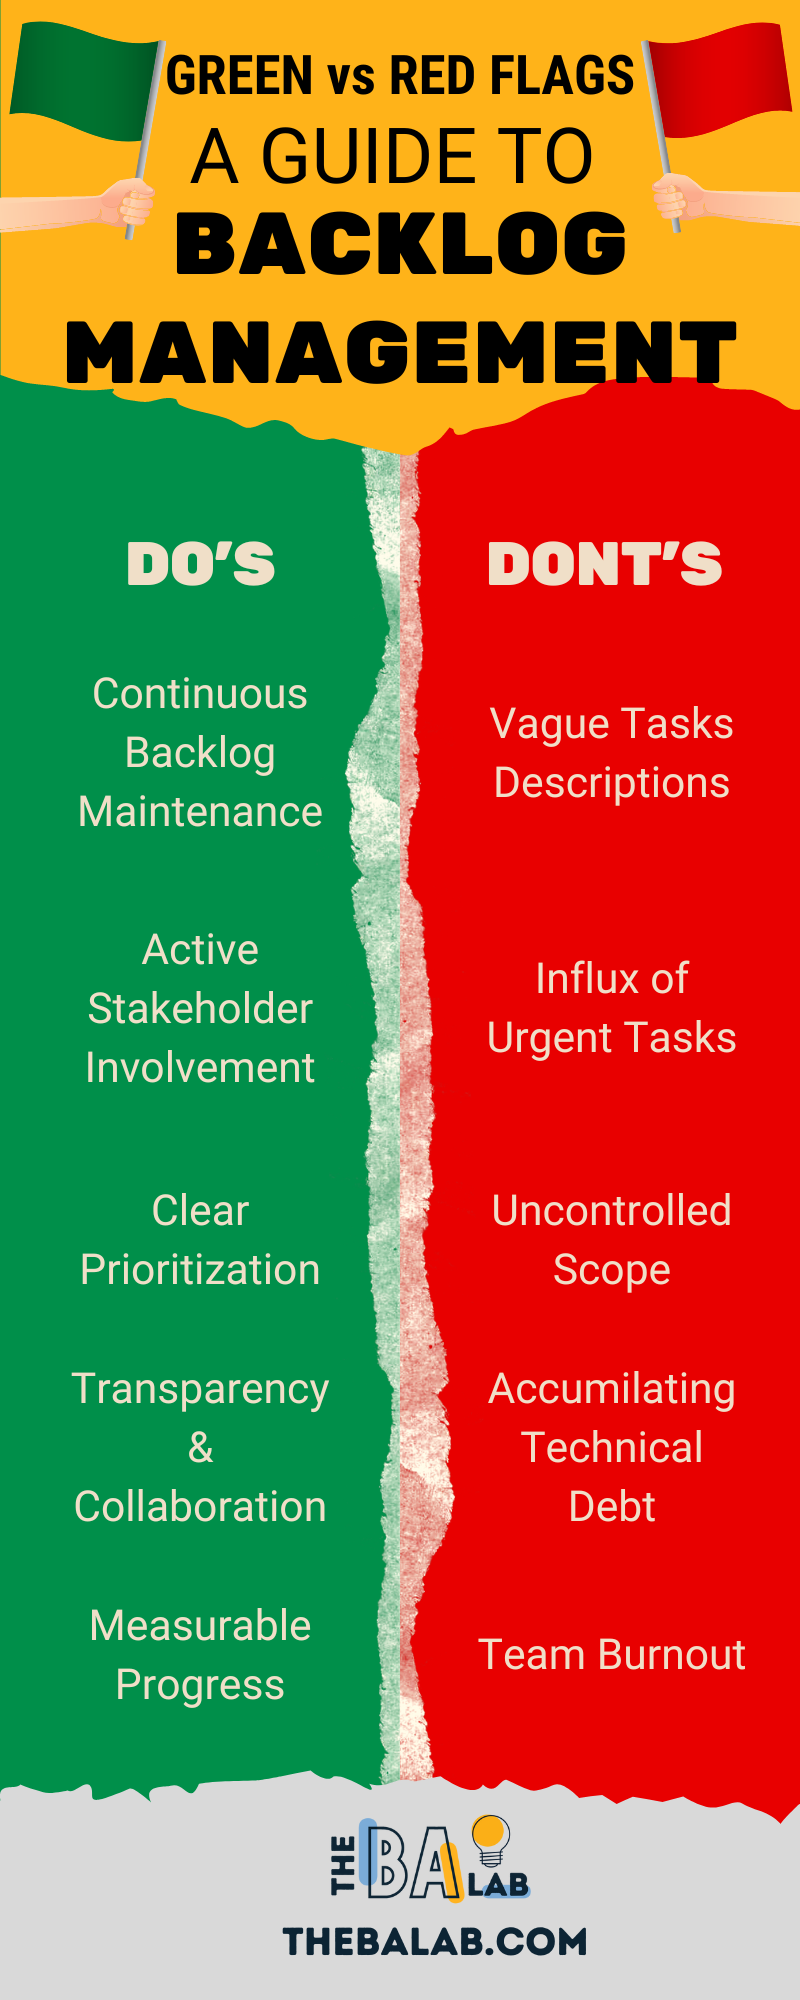 Backlog Management Green Flags vs Red Flags Infographic